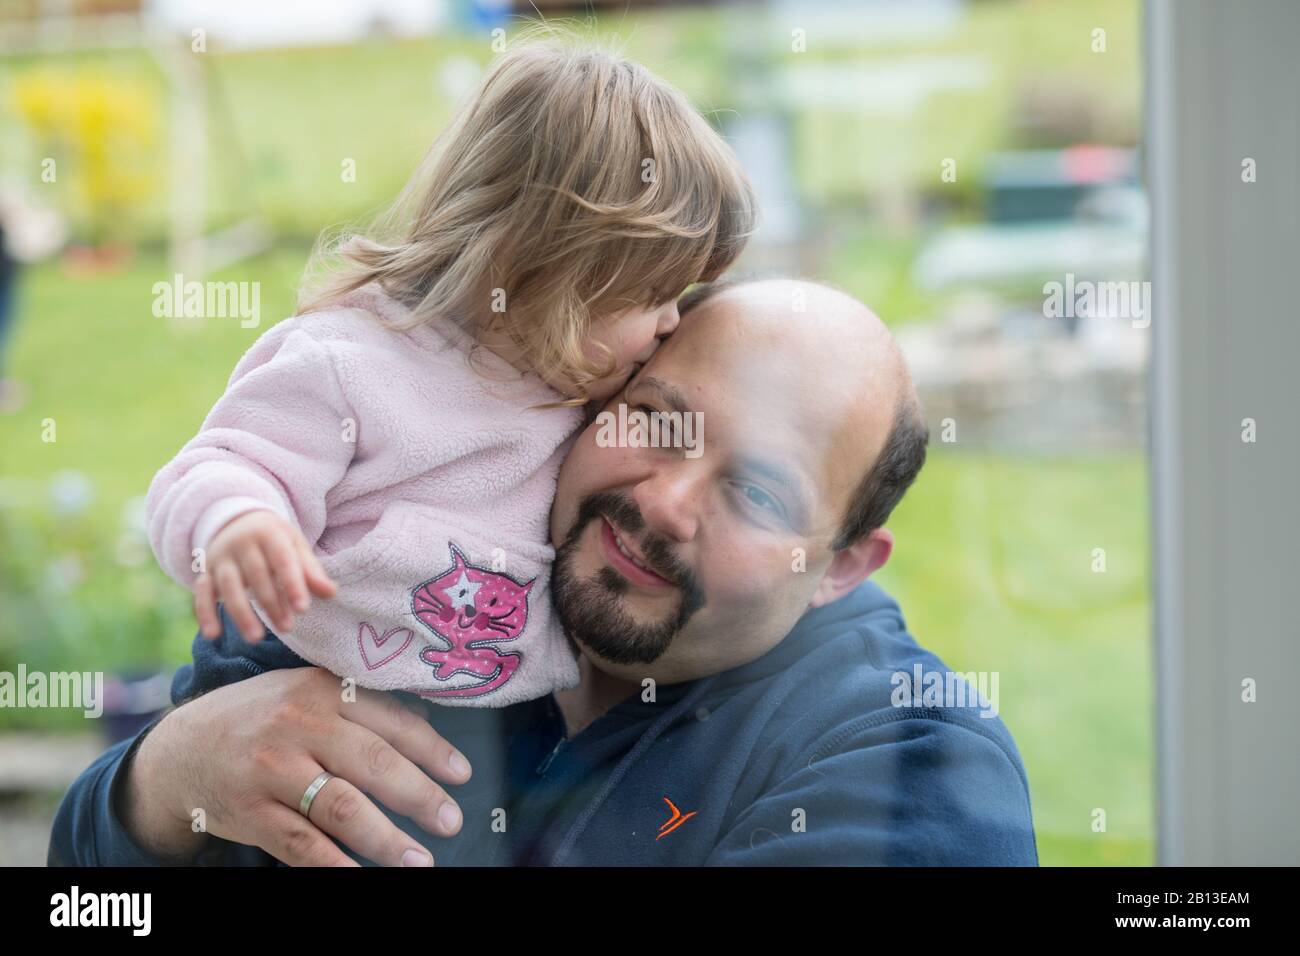 Little girl kissing her father Stock Photo